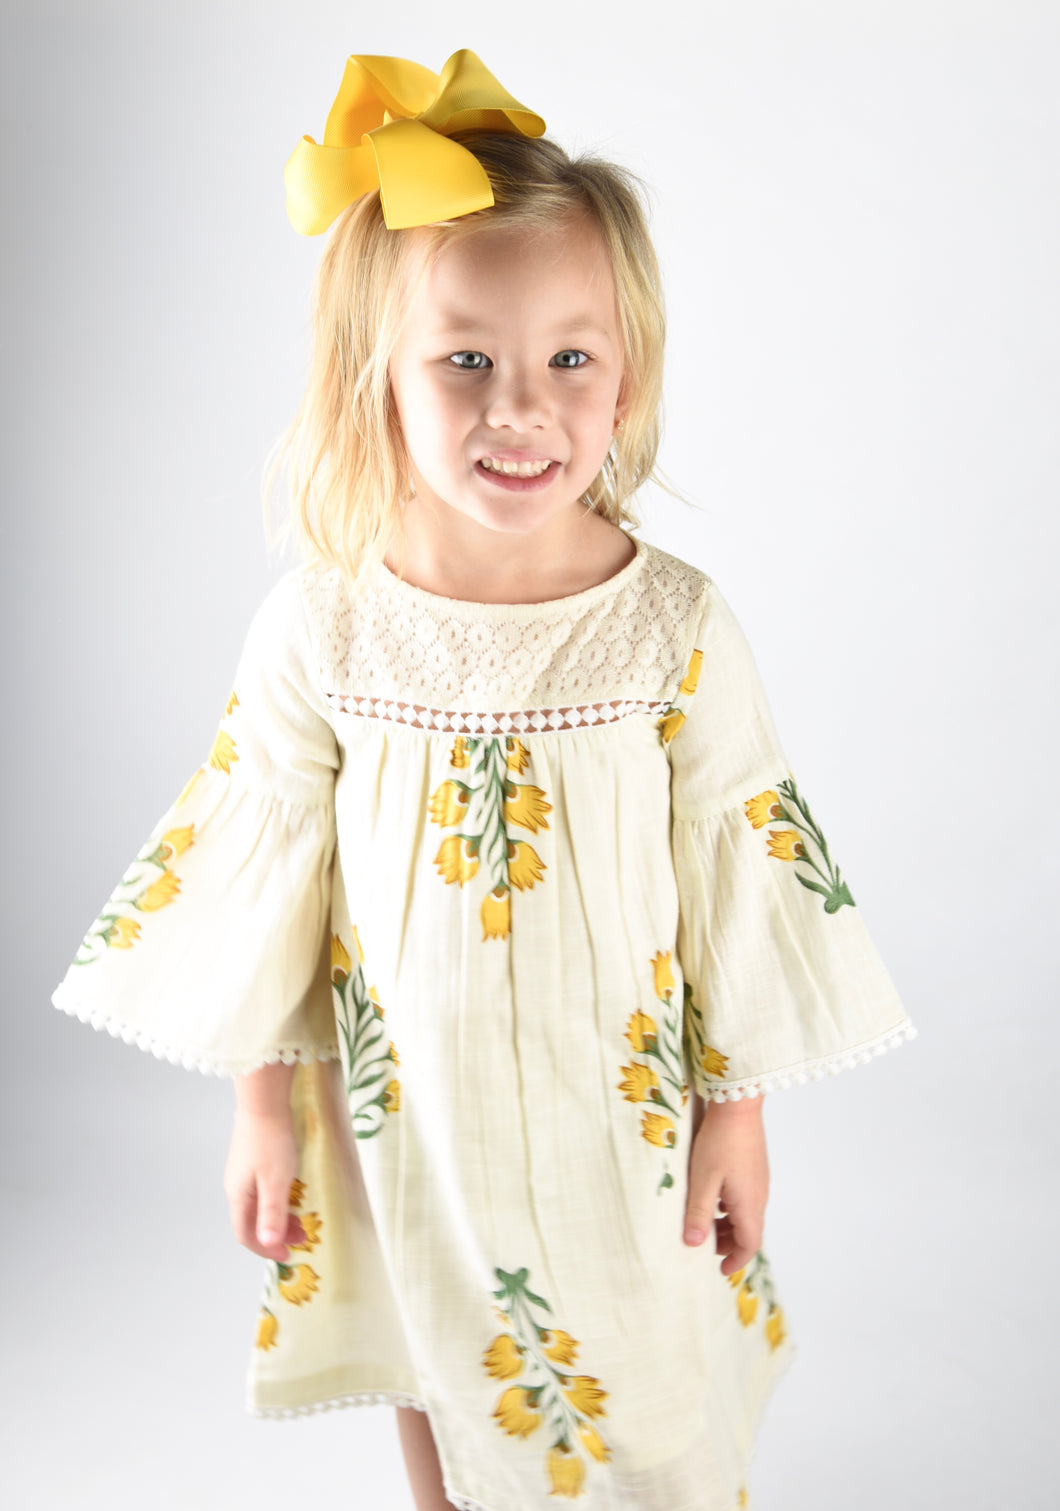 Off White and Yellow Floral Dress with Lace Detail - Kids Wholesale Boutique Clothing, Dress - Girls Dresses, Yo Baby Wholesale - Yo Baby